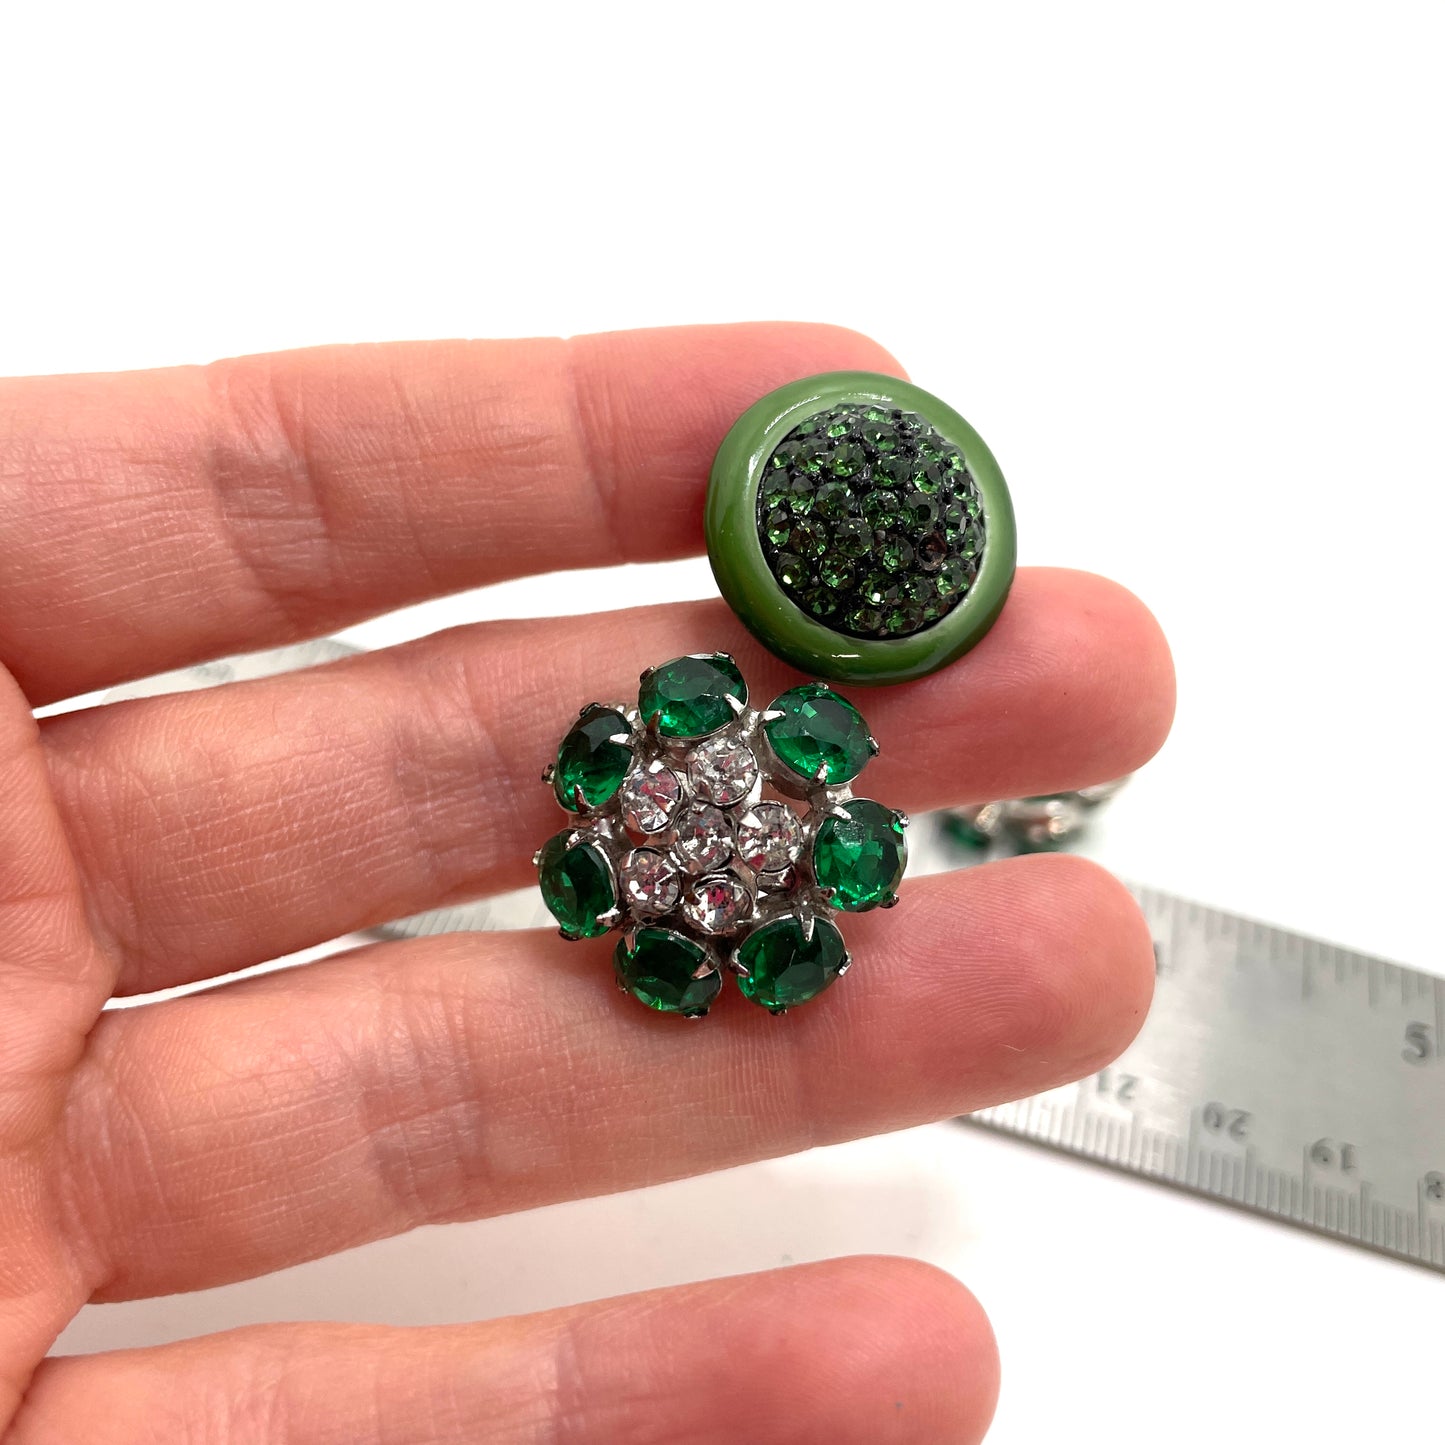 Two Pairs of Green Retro Clip Earrings